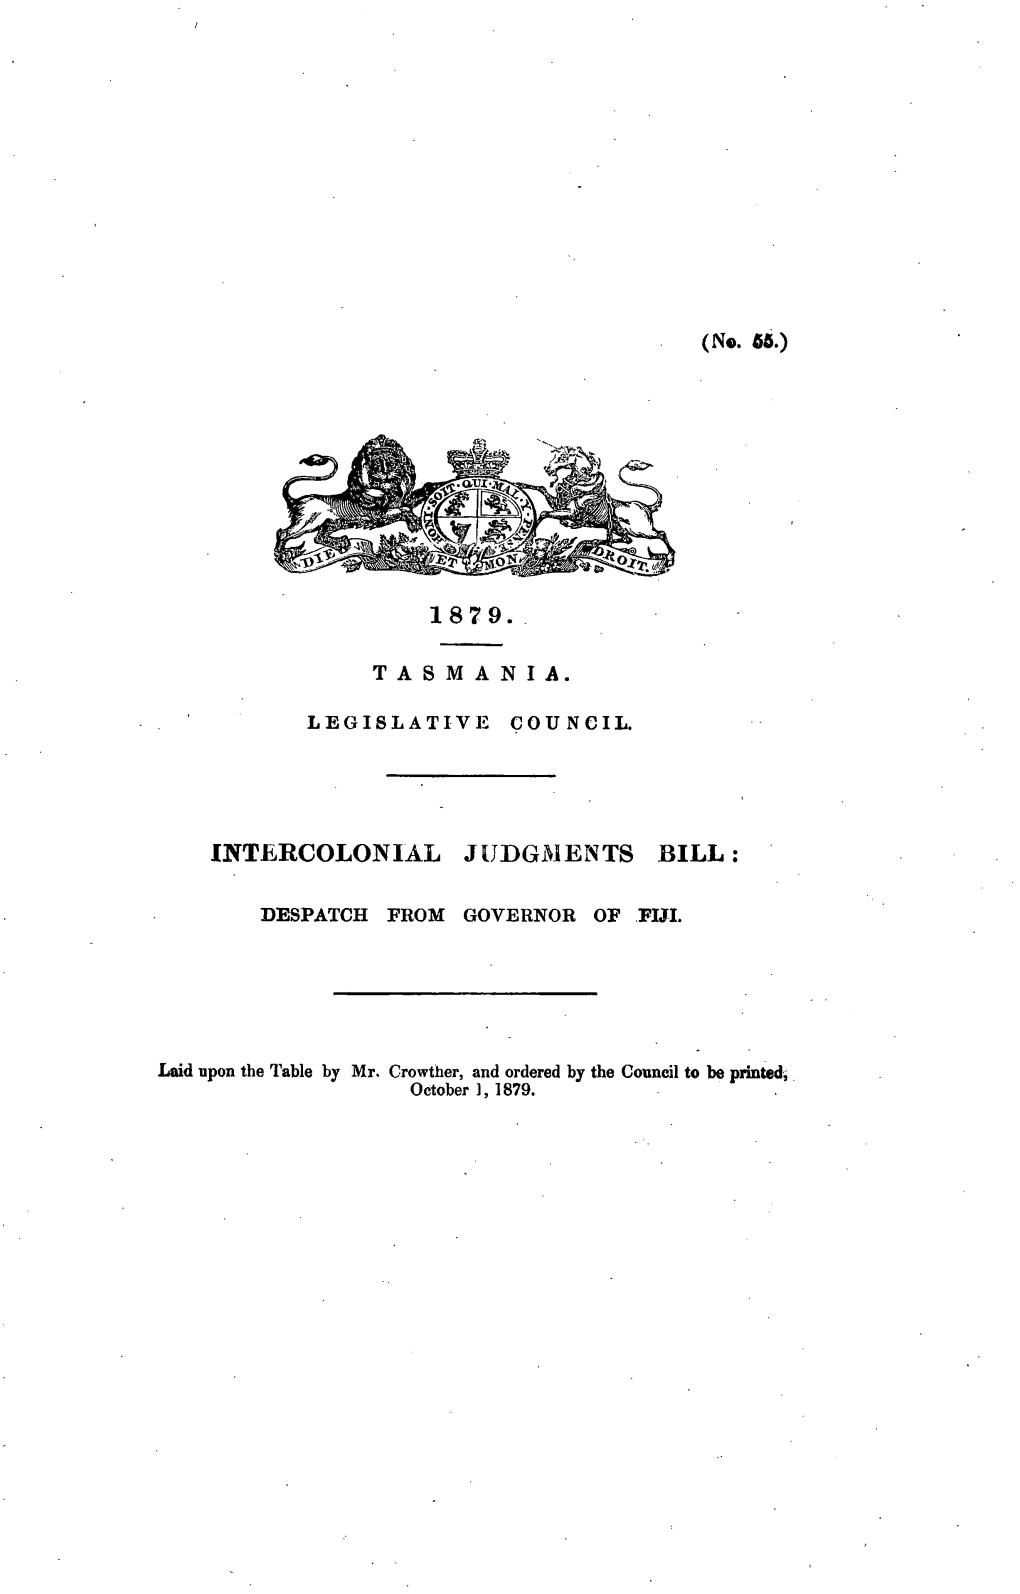 Intercolonial Judgements Bill: Despatch from Governor of FIJI